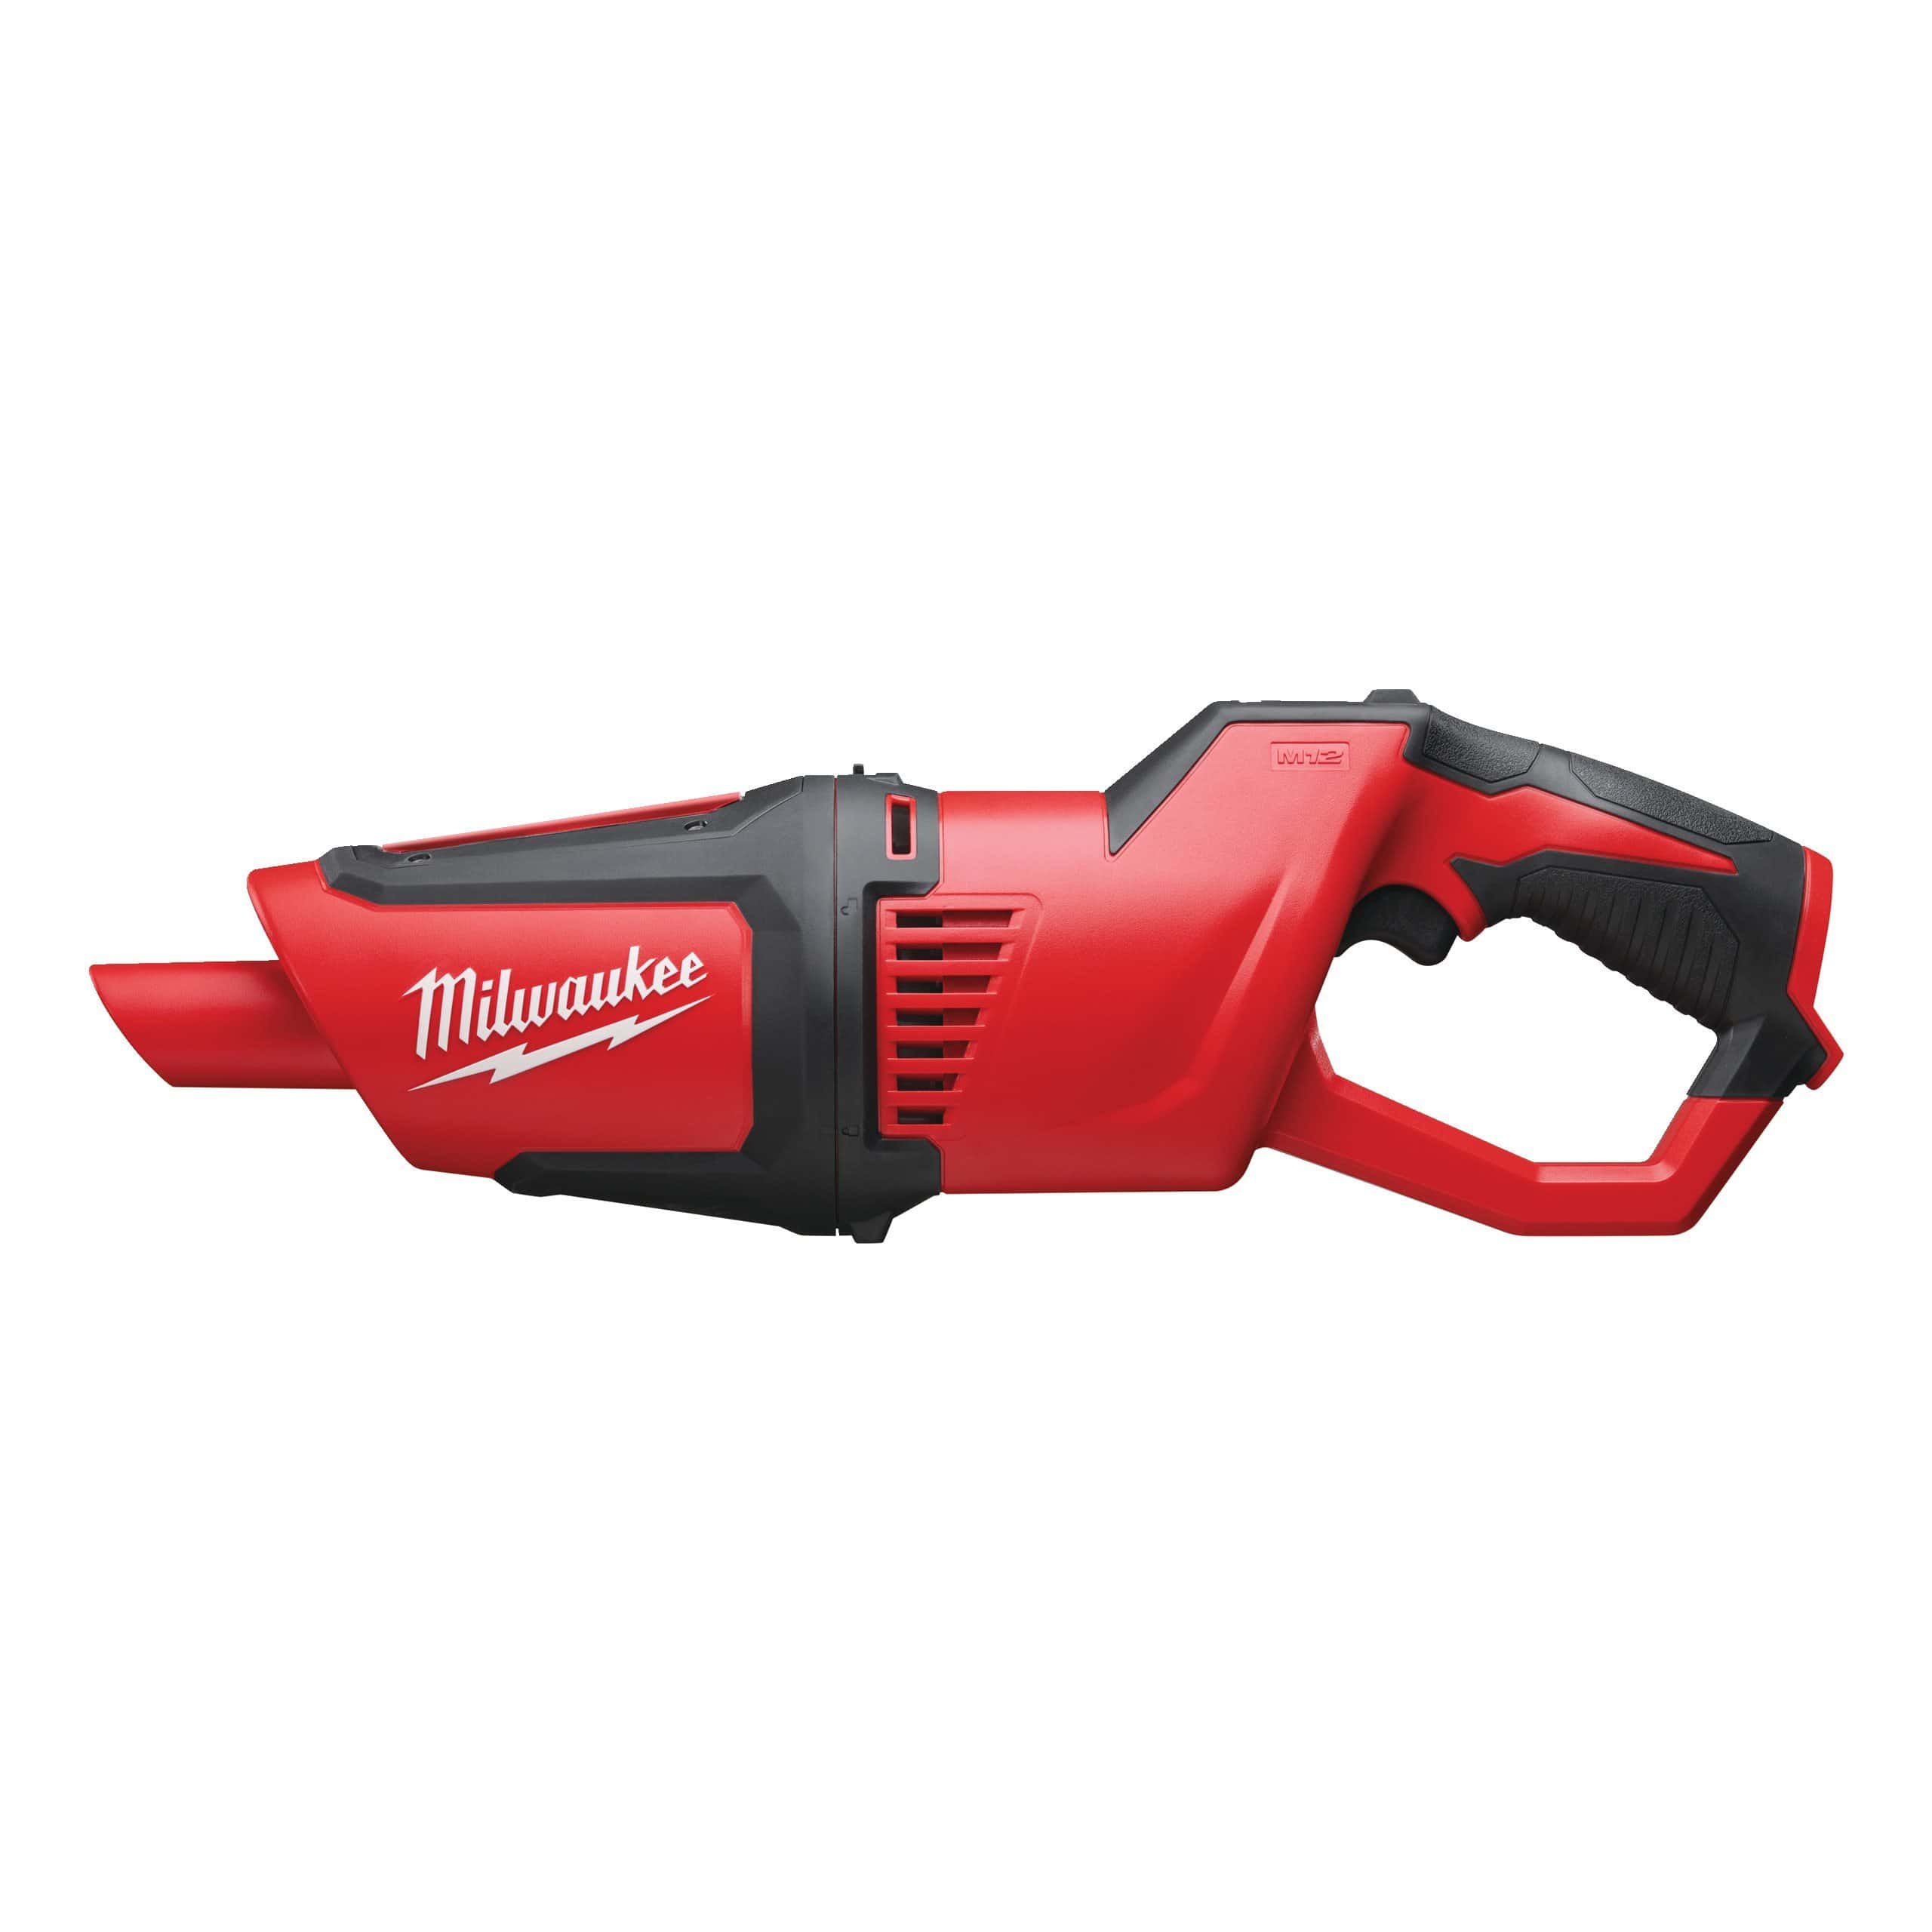 Milwaukee M12 FUEL™ Cordless Sub Compact ¼" Impact Ratchet 12V - M12 FIR14-0 | Supply Master | Accra, Ghana Tools Building Steel Engineering Hardware tool